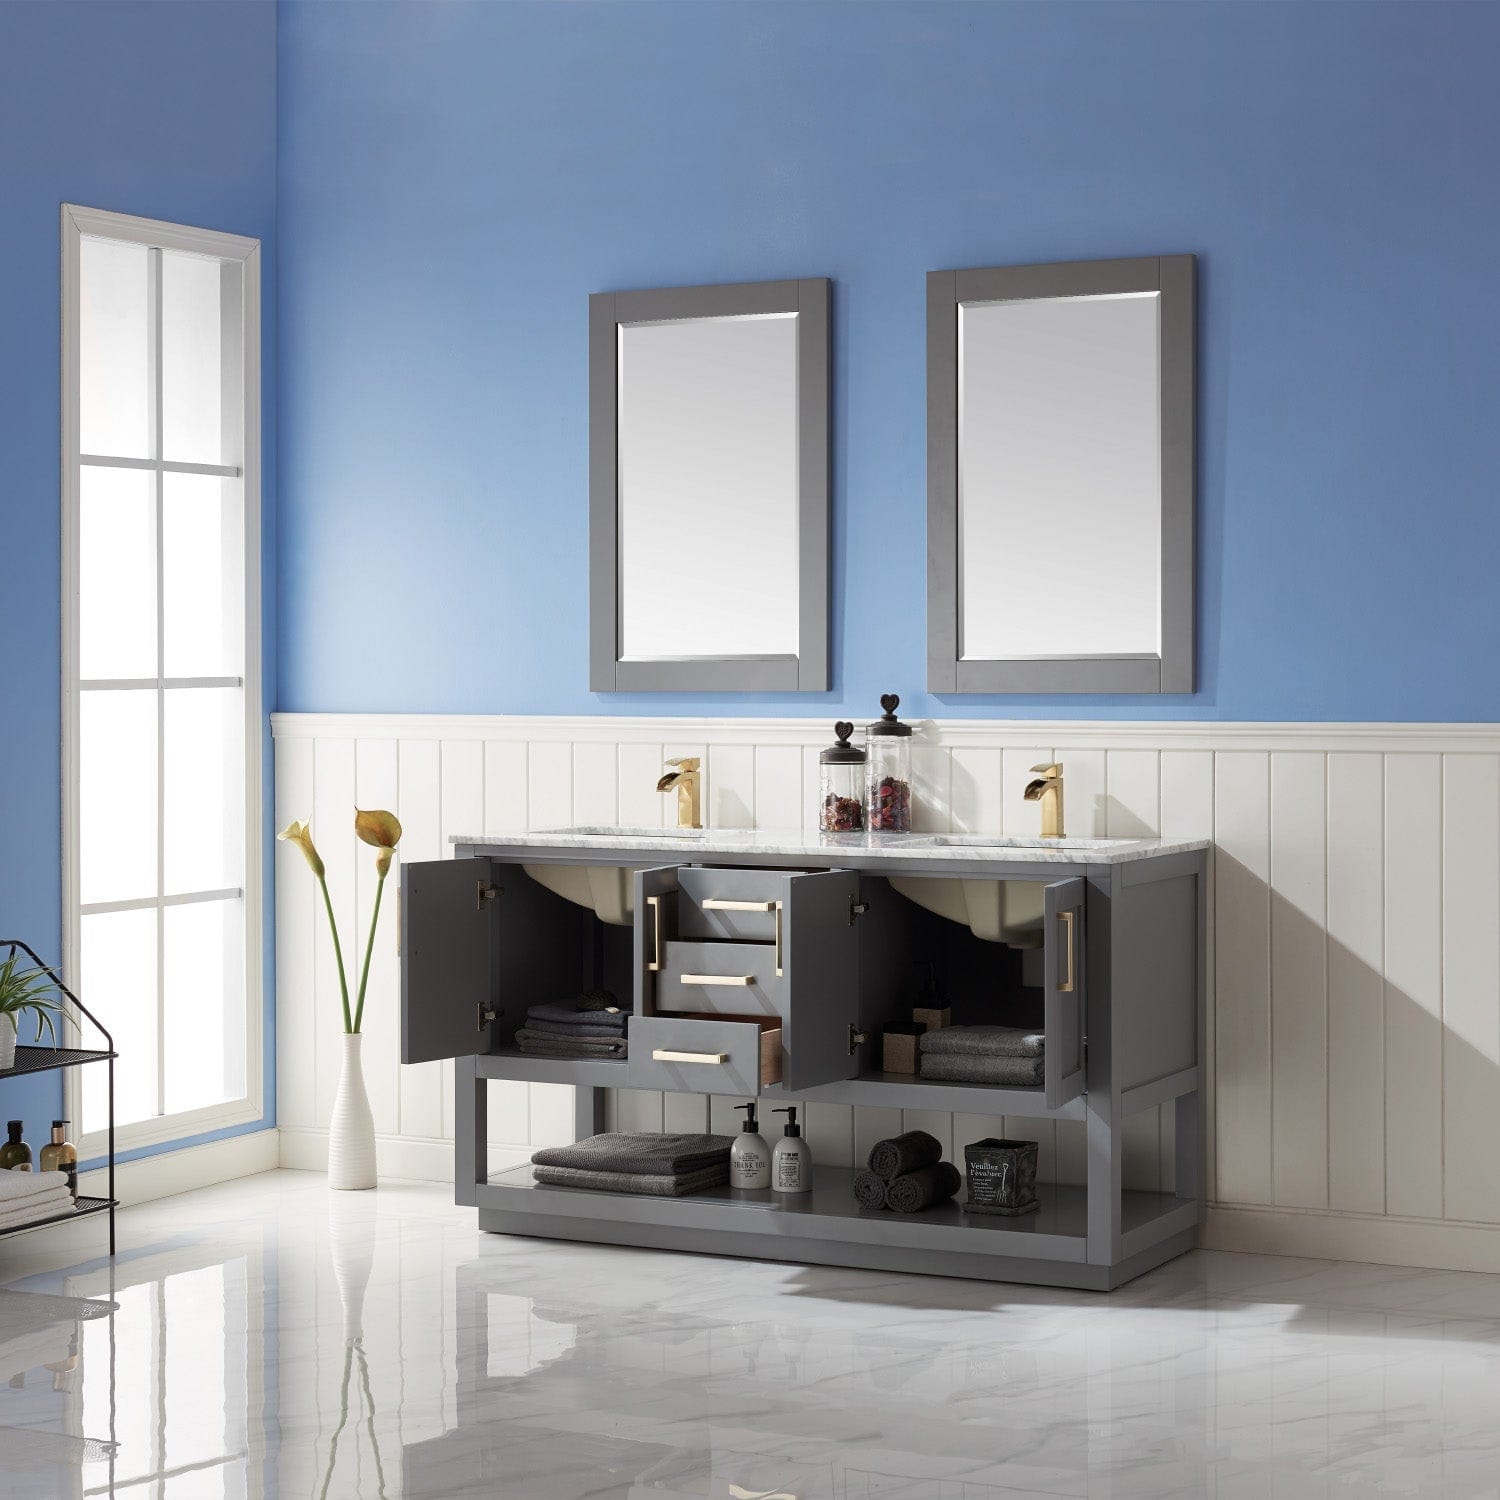 Altair Remi 60" Double Bathroom Vanity Set in Gray and Carrara White Marble Countertop with Mirror 532060-GR-CA - Molaix631112971515Vanity532060-GR-CA